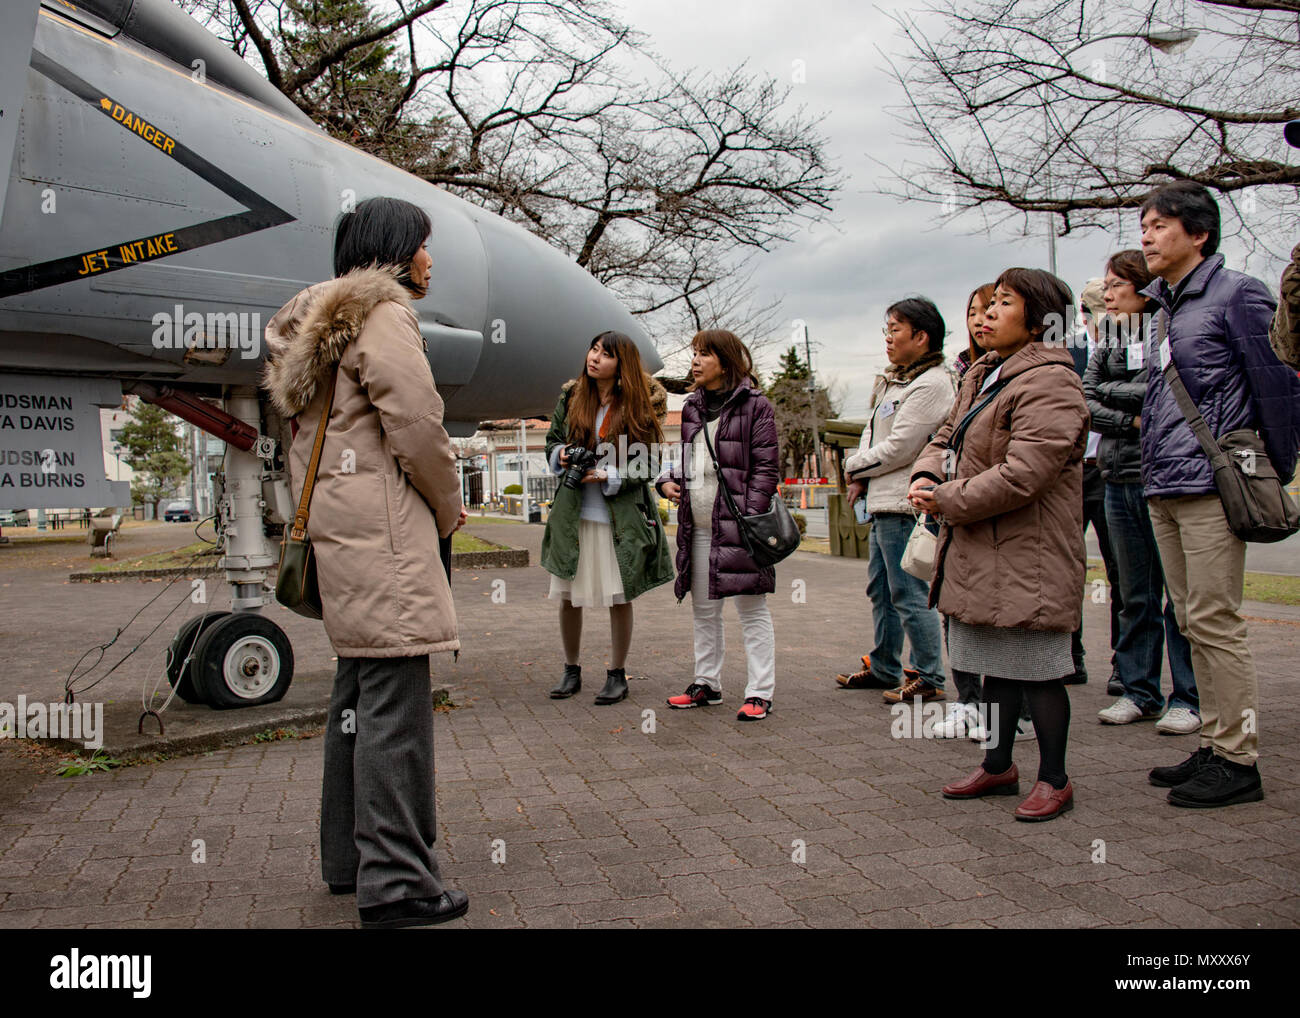 161213-N-YD204-017 NAVAL AIR FACILITY ATSUGI, Japan (Dec. 13, 2016) Naval Air Facility (NAF) Atsugi Host Nation Relation’s Office (HNRO) Representative Sumie Maruyama leads a group of visitors through the base’s Alliance Park during a “Twitter Tour” of the installation. NAF Atsugi HNRO held the tour as part of a community outreach initiative to allow followers of the command’s social media an opportunity to learn more about the base. (U.S. Navy photo by Petty Officer 3rd Class Matthew C. Duncker/Released) Stock Photo